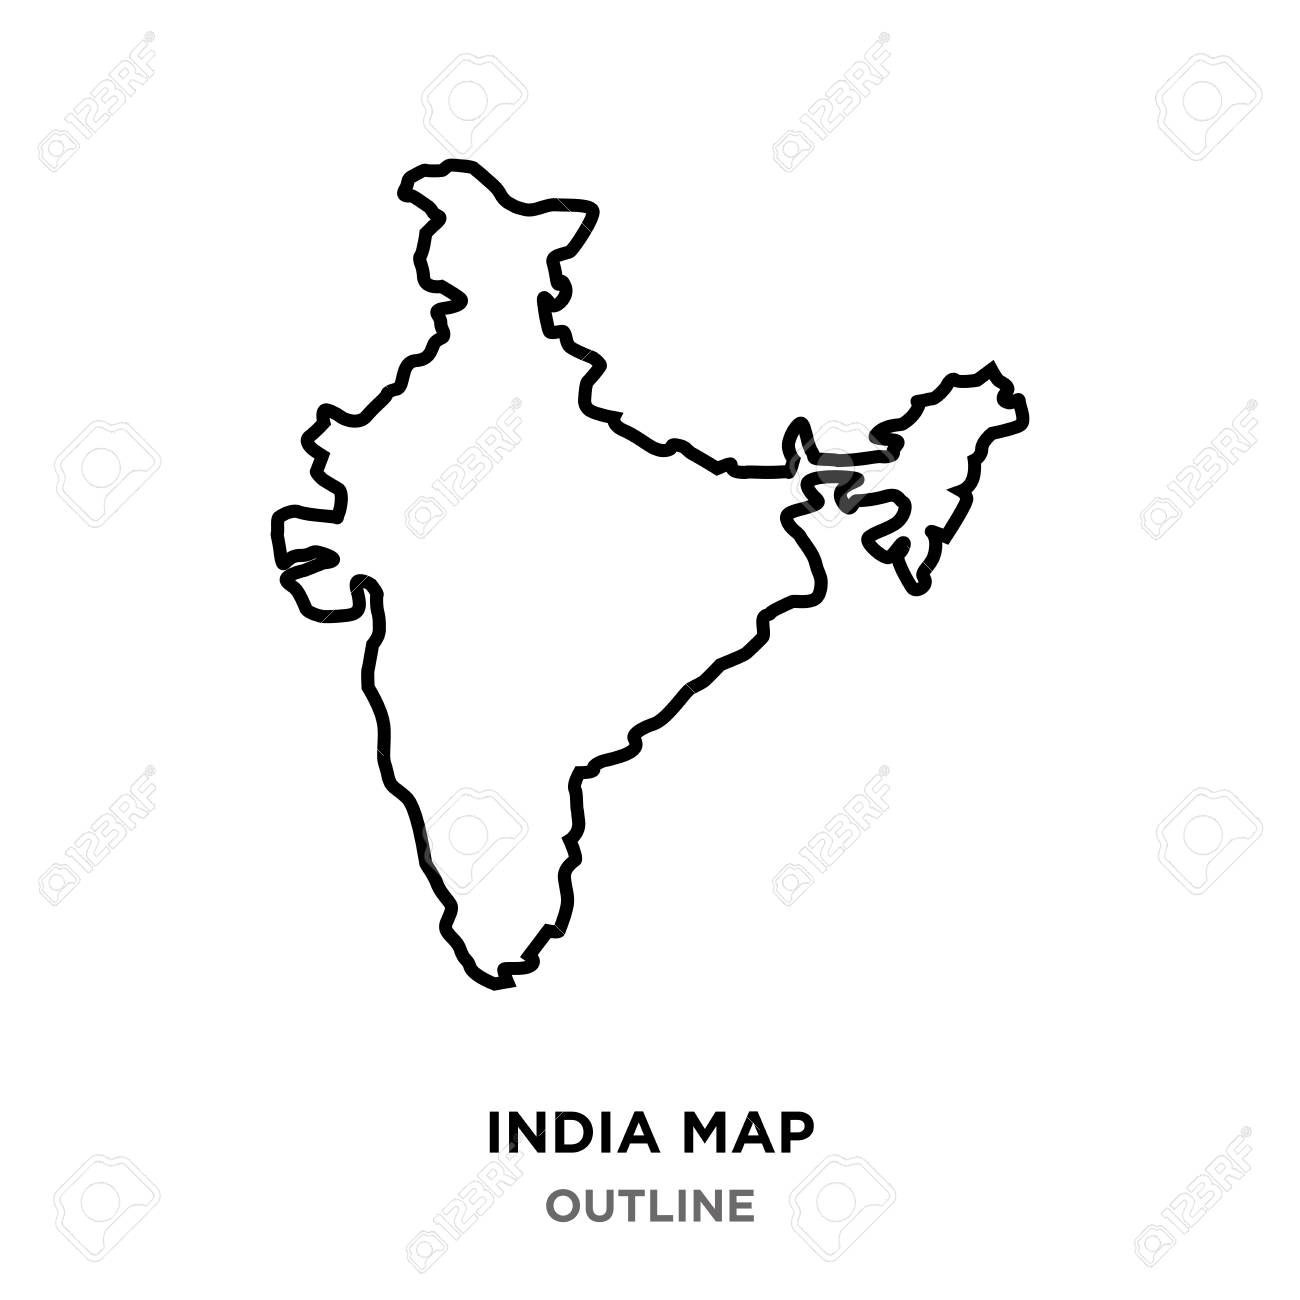 India Silhouette Map Images On White Background Royalty Free SVG